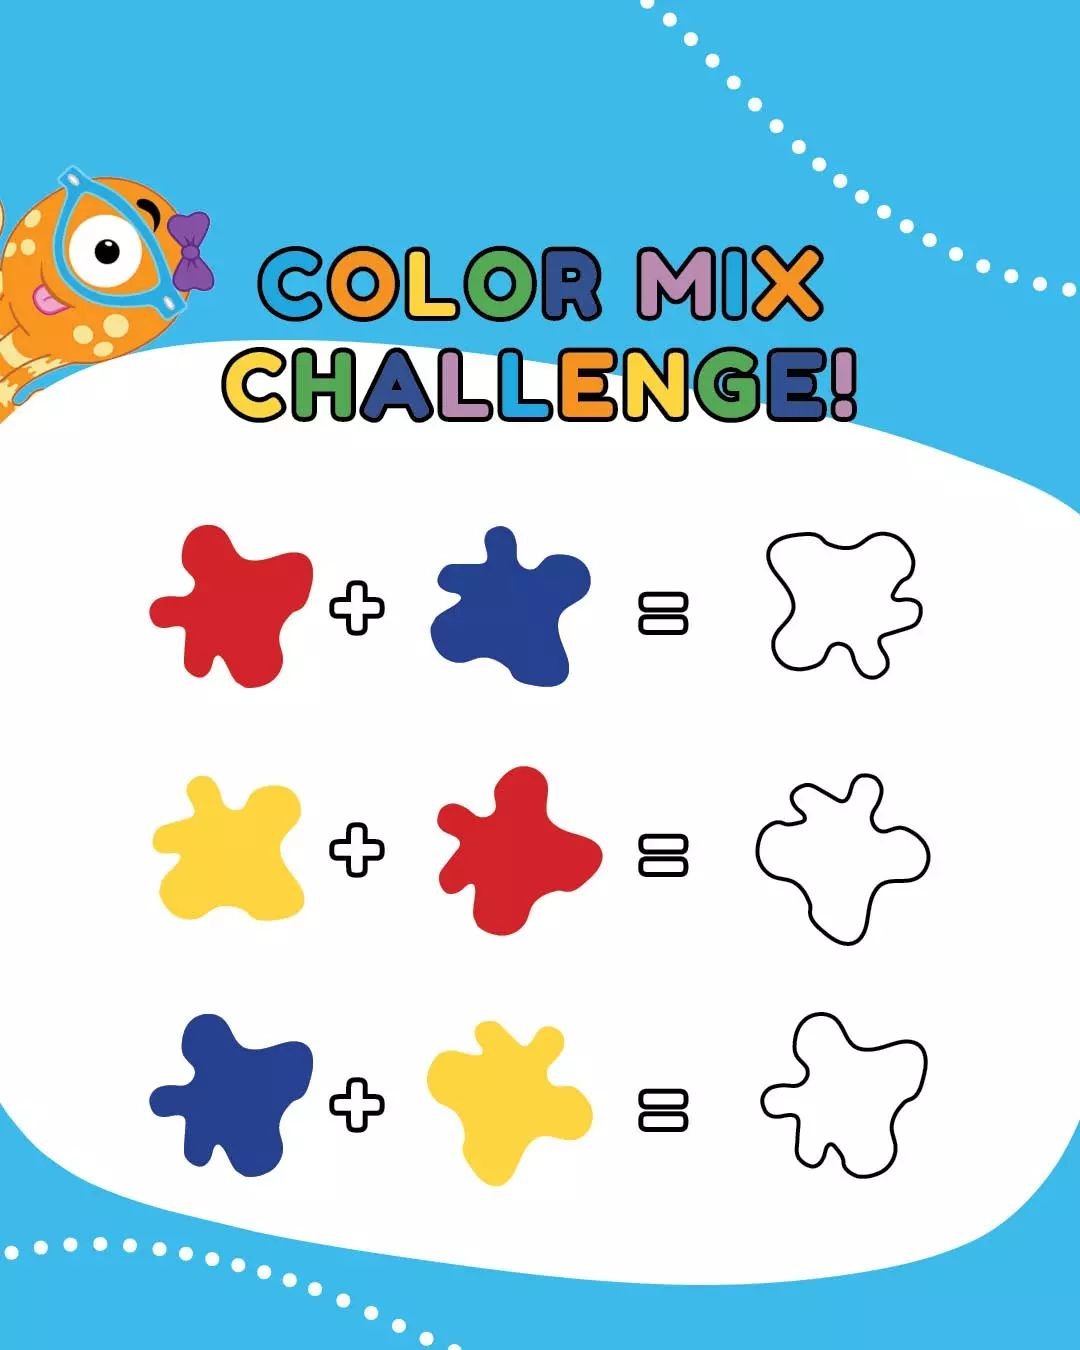 Mix and Match! 

You all know we love playing with colors - especially when it comes to our Color Changing dinos&nbsp;🦖 

Do you know what colors to mix to get purple? How about orange? 

Swipe to learn how&nbsp;👉
.
.
.
.
.
.
#toysUS #toymonsterint